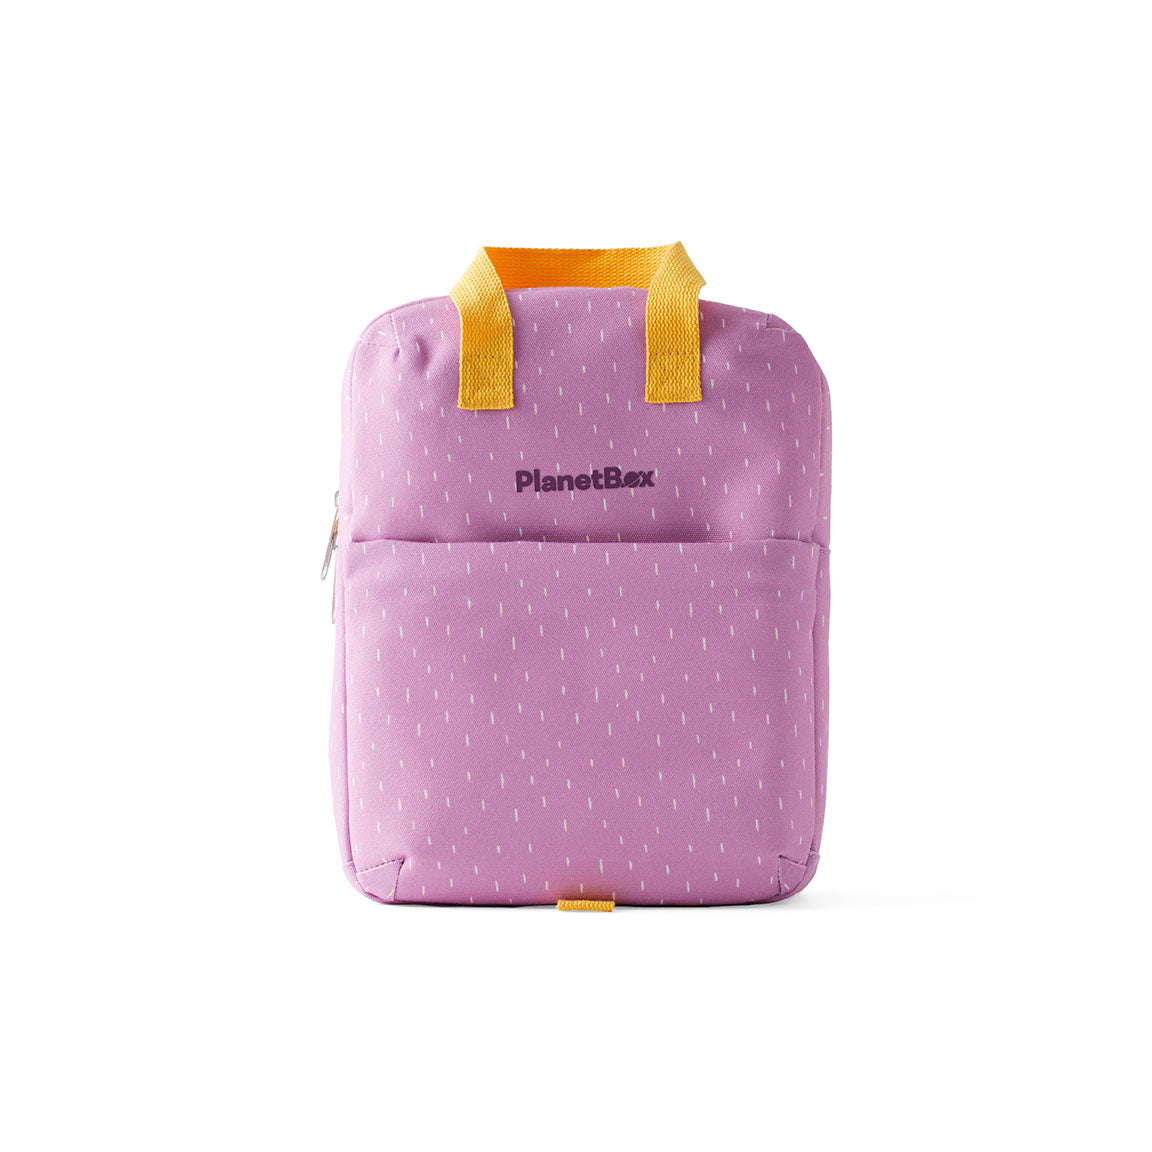 Planetbox Tote Bag: Pansy Dashes Lunch Bag by PlanetBox | Cute Kid Stuff